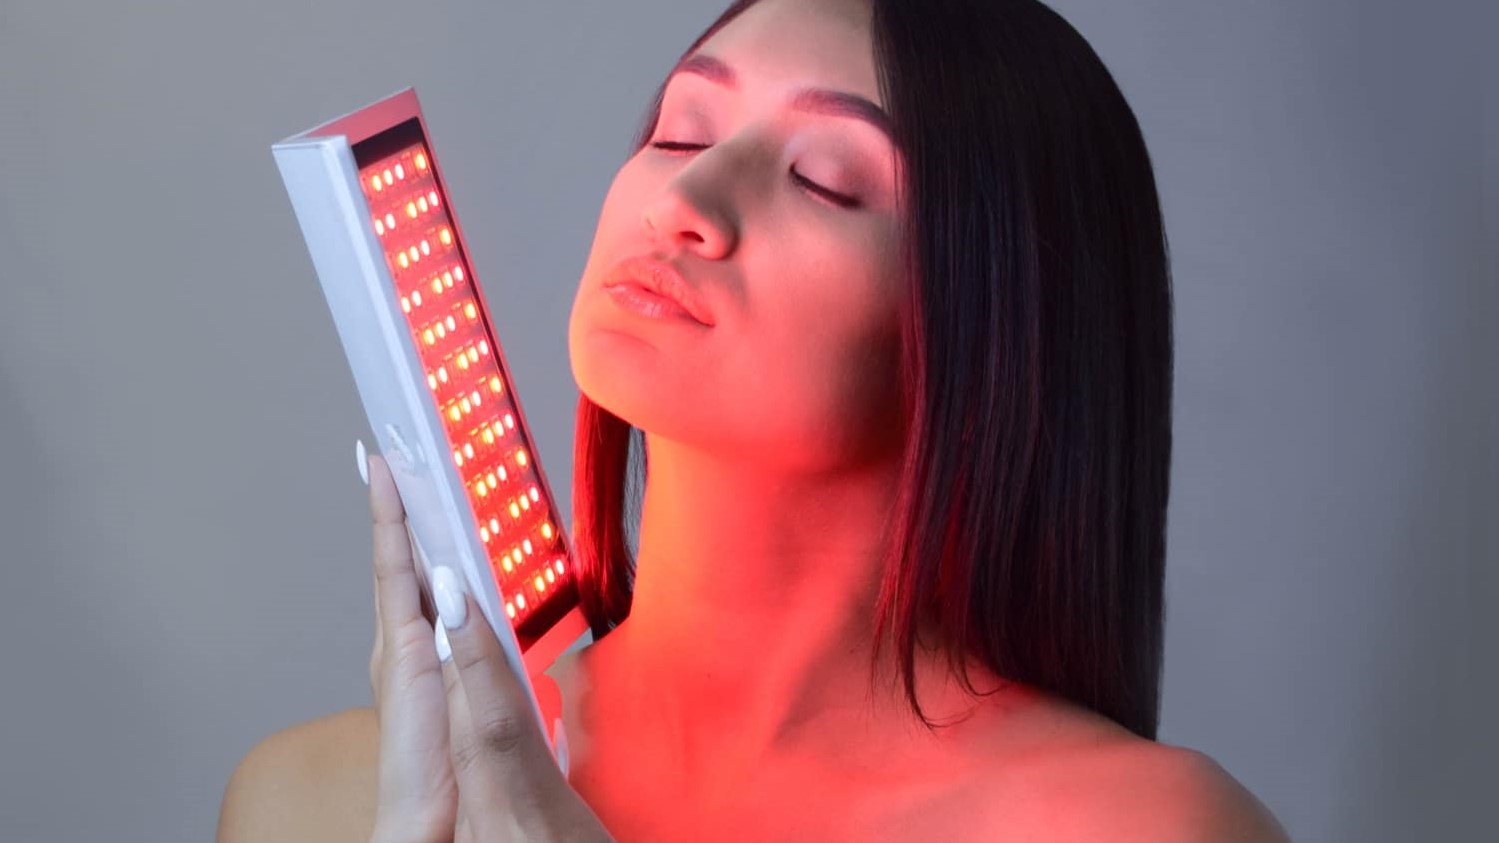 Top 10 Best Red Light Therapy Devices Review 2022